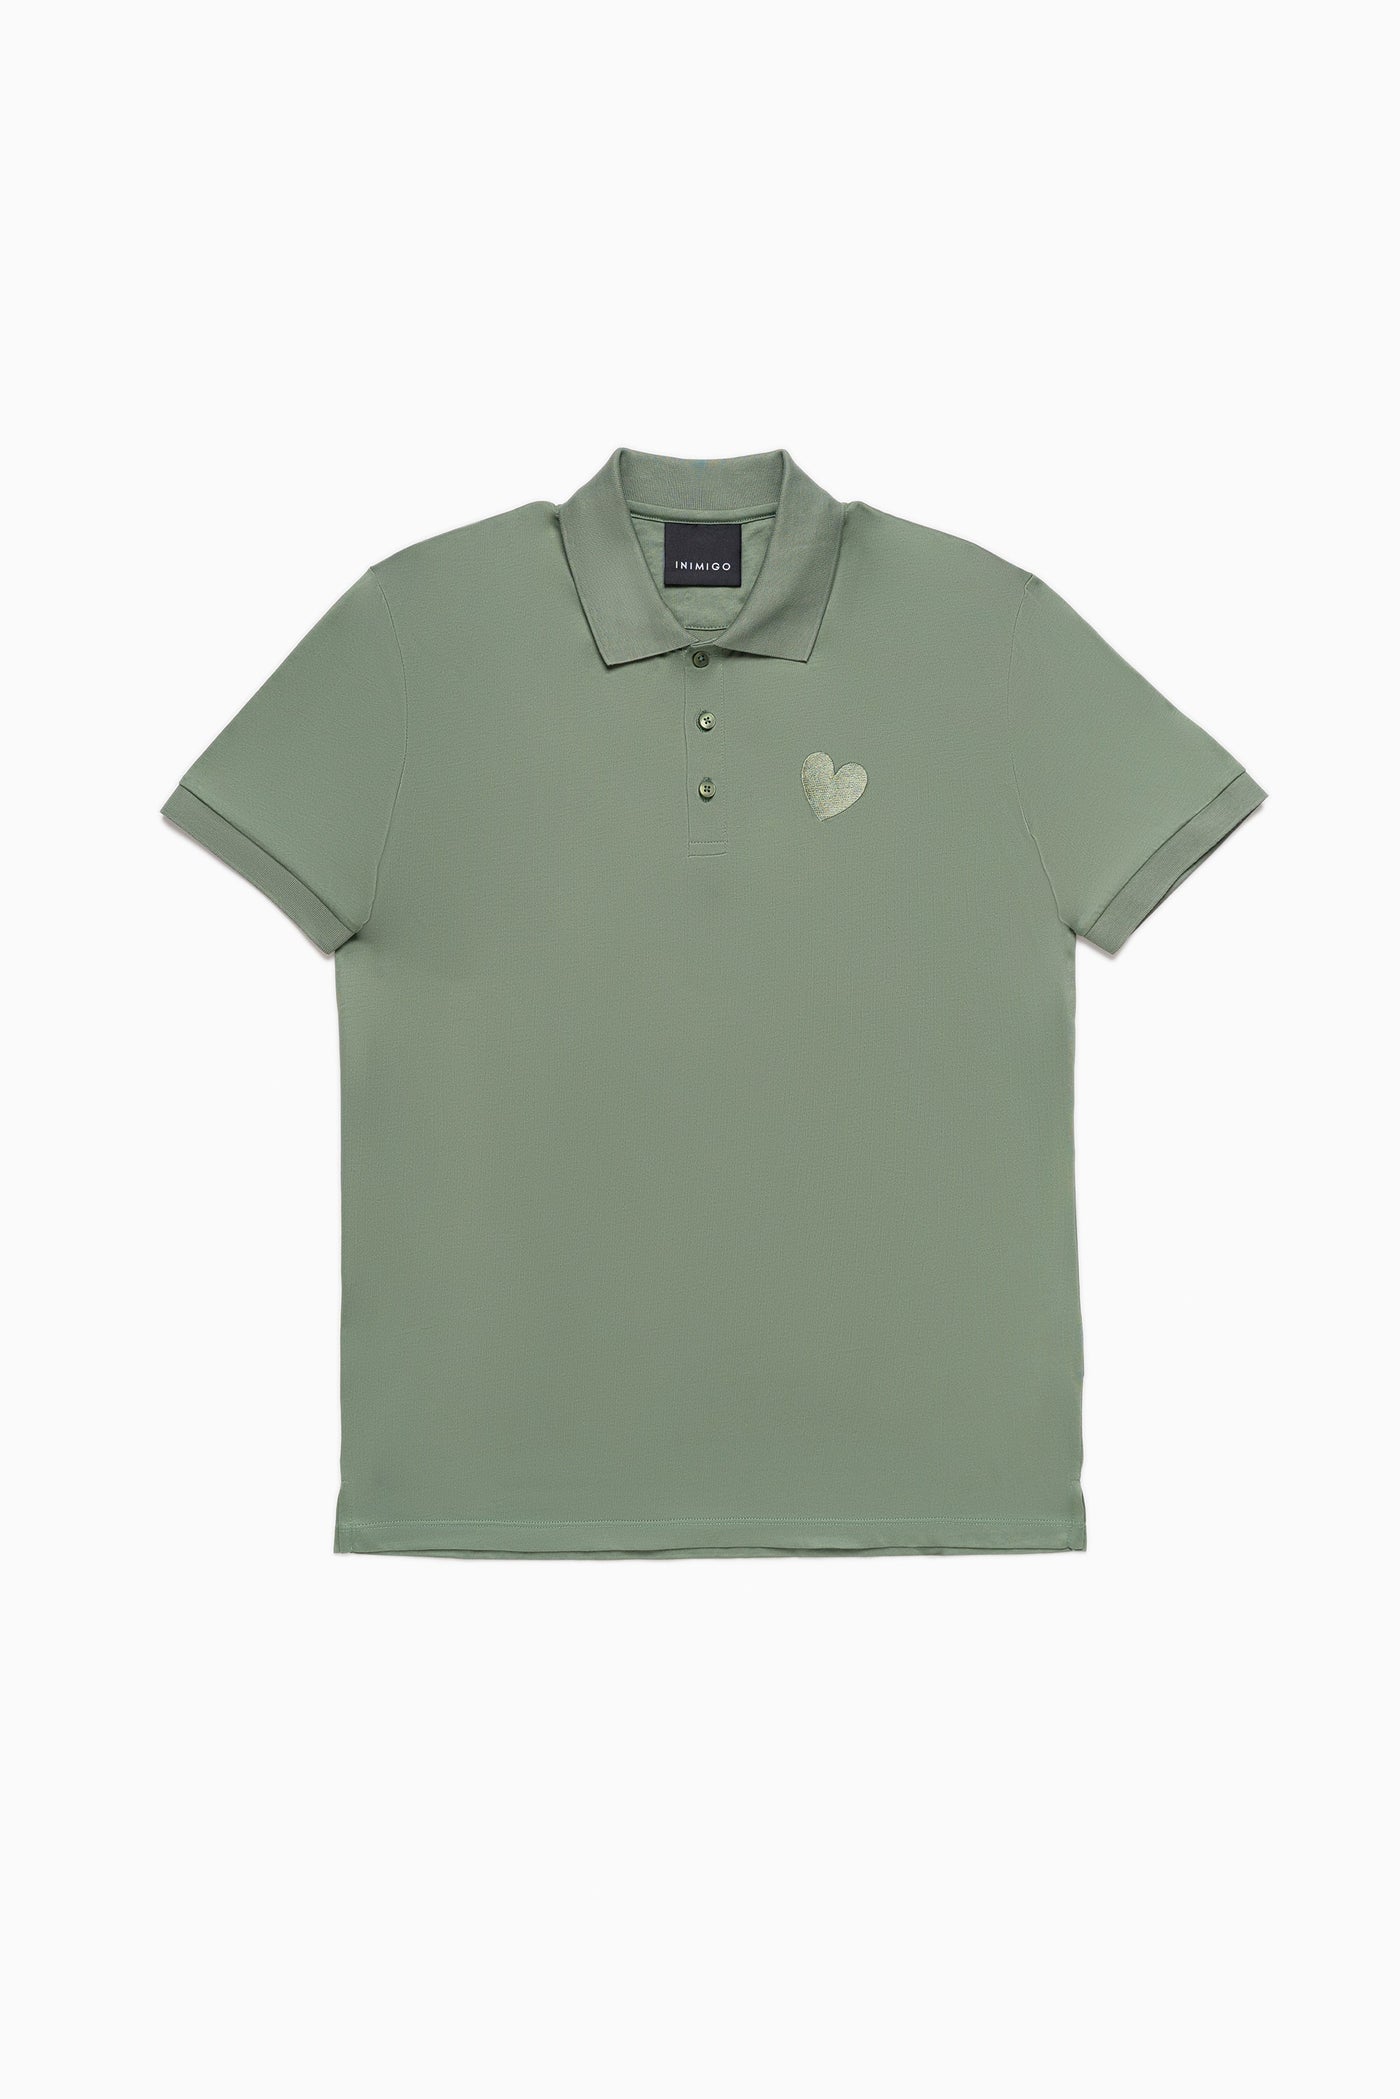 Classic Embroidery Heart Jersey Olivine Polo